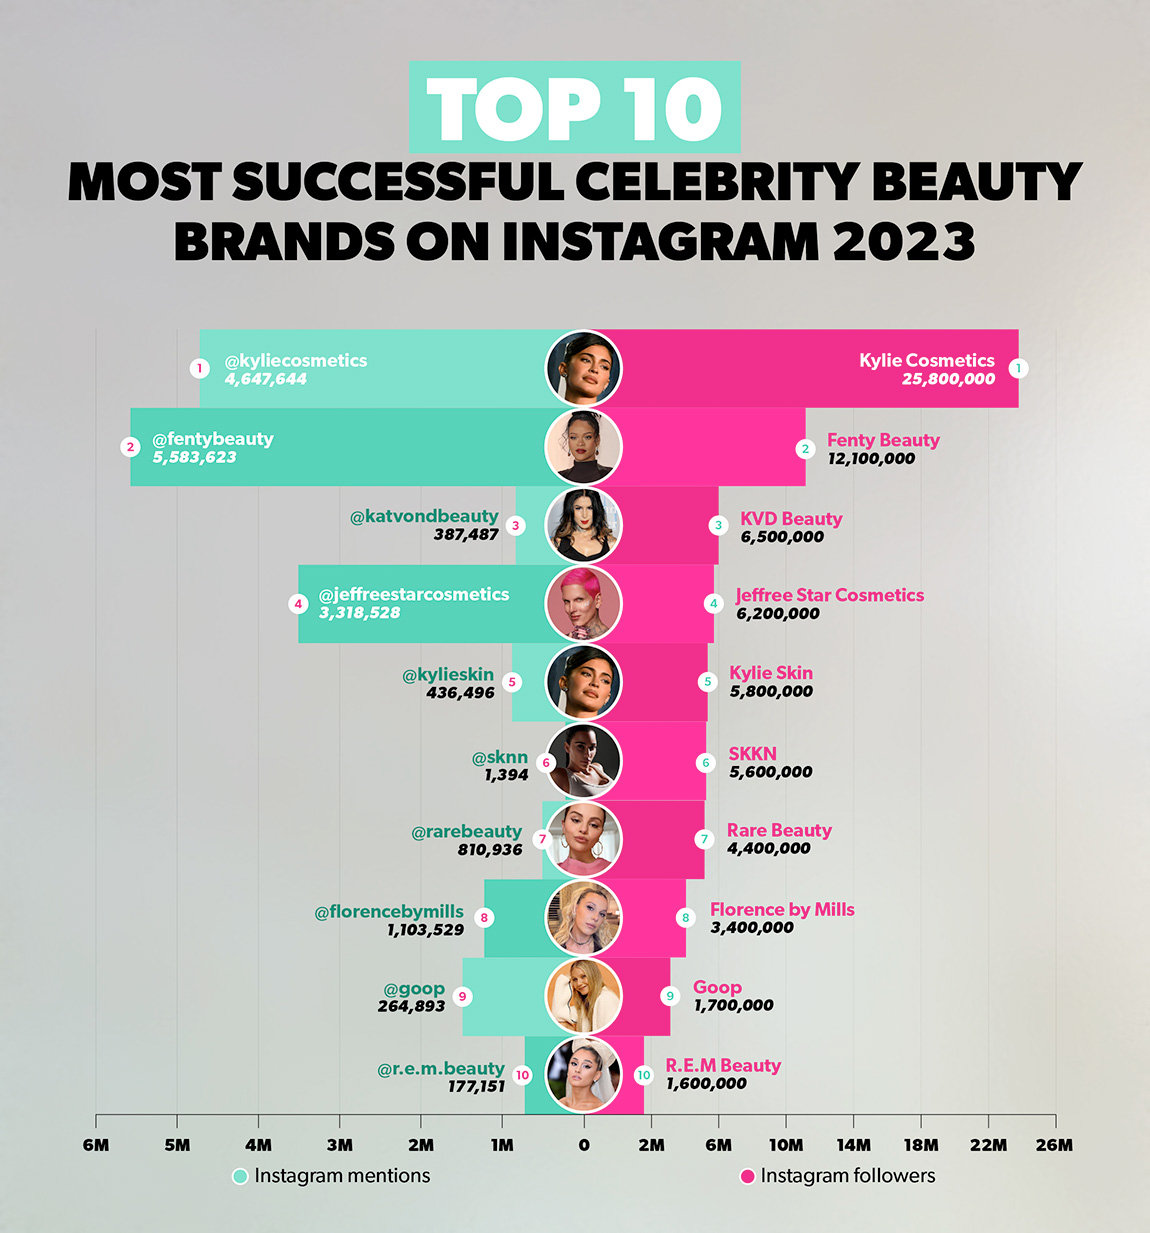 Top-10 Most Mentioned Make-up Brands by Influencers